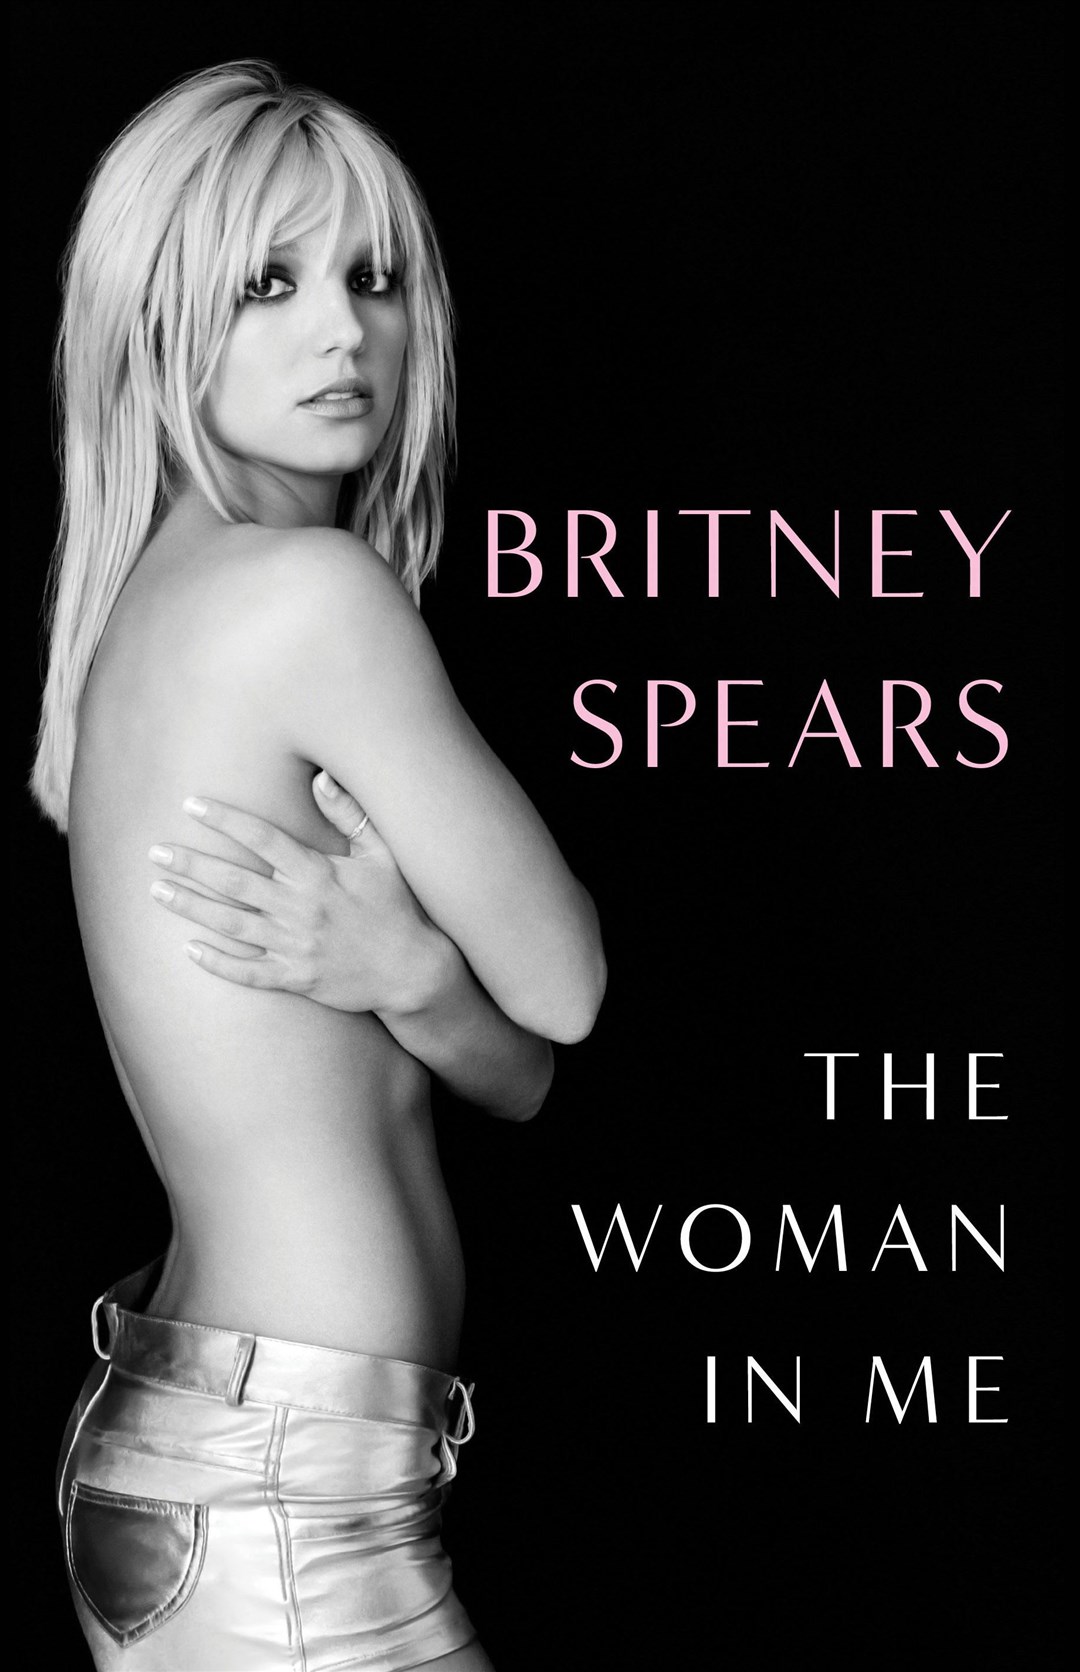 The Woman In Me by Britney Spears (Gallery Books)